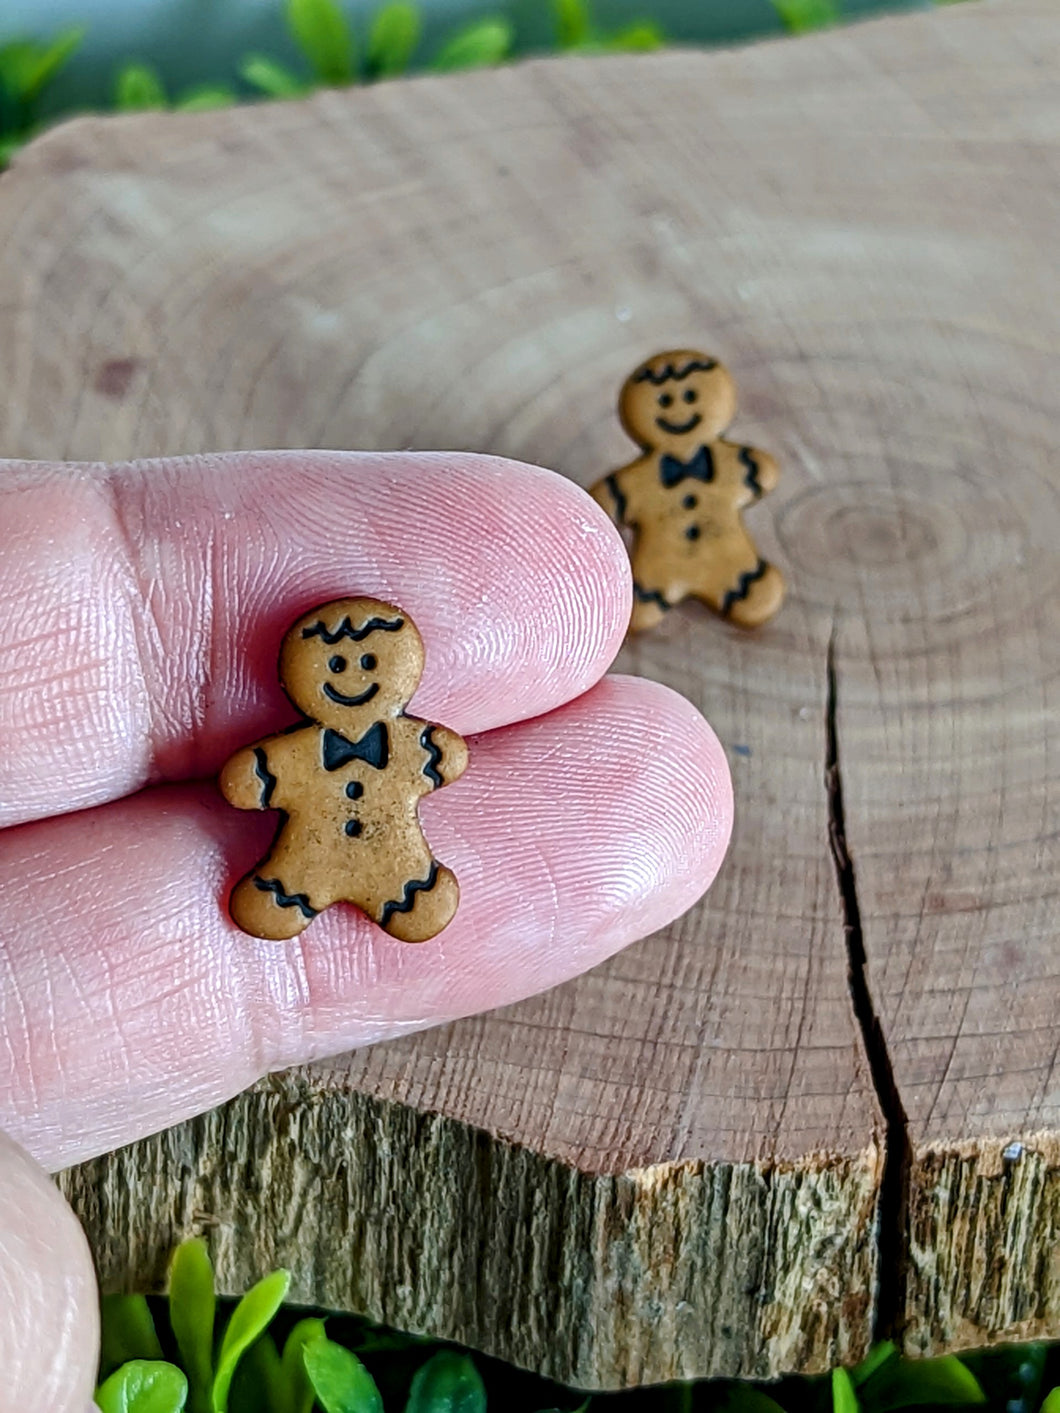 Ginger Bread Man with Bowtie Earrings